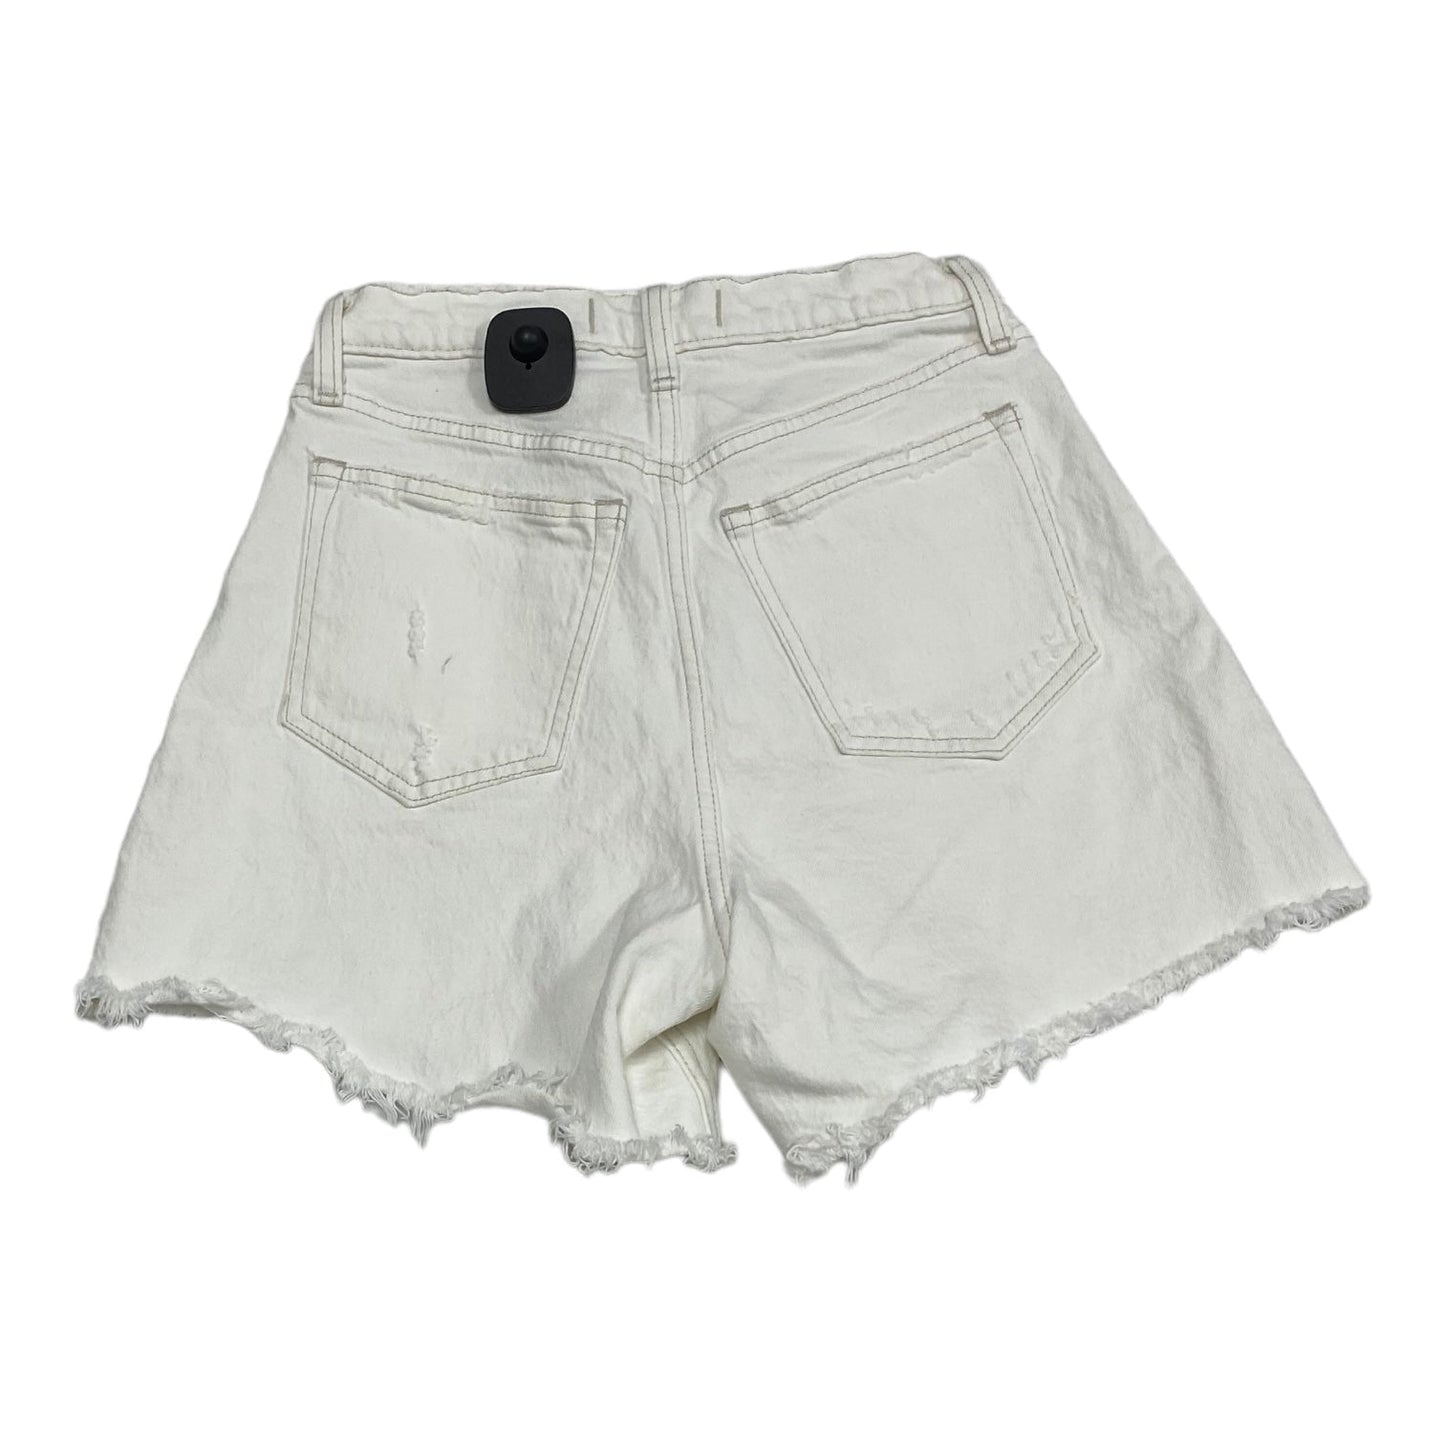 White Shorts Abercrombie And Fitch, Size 00